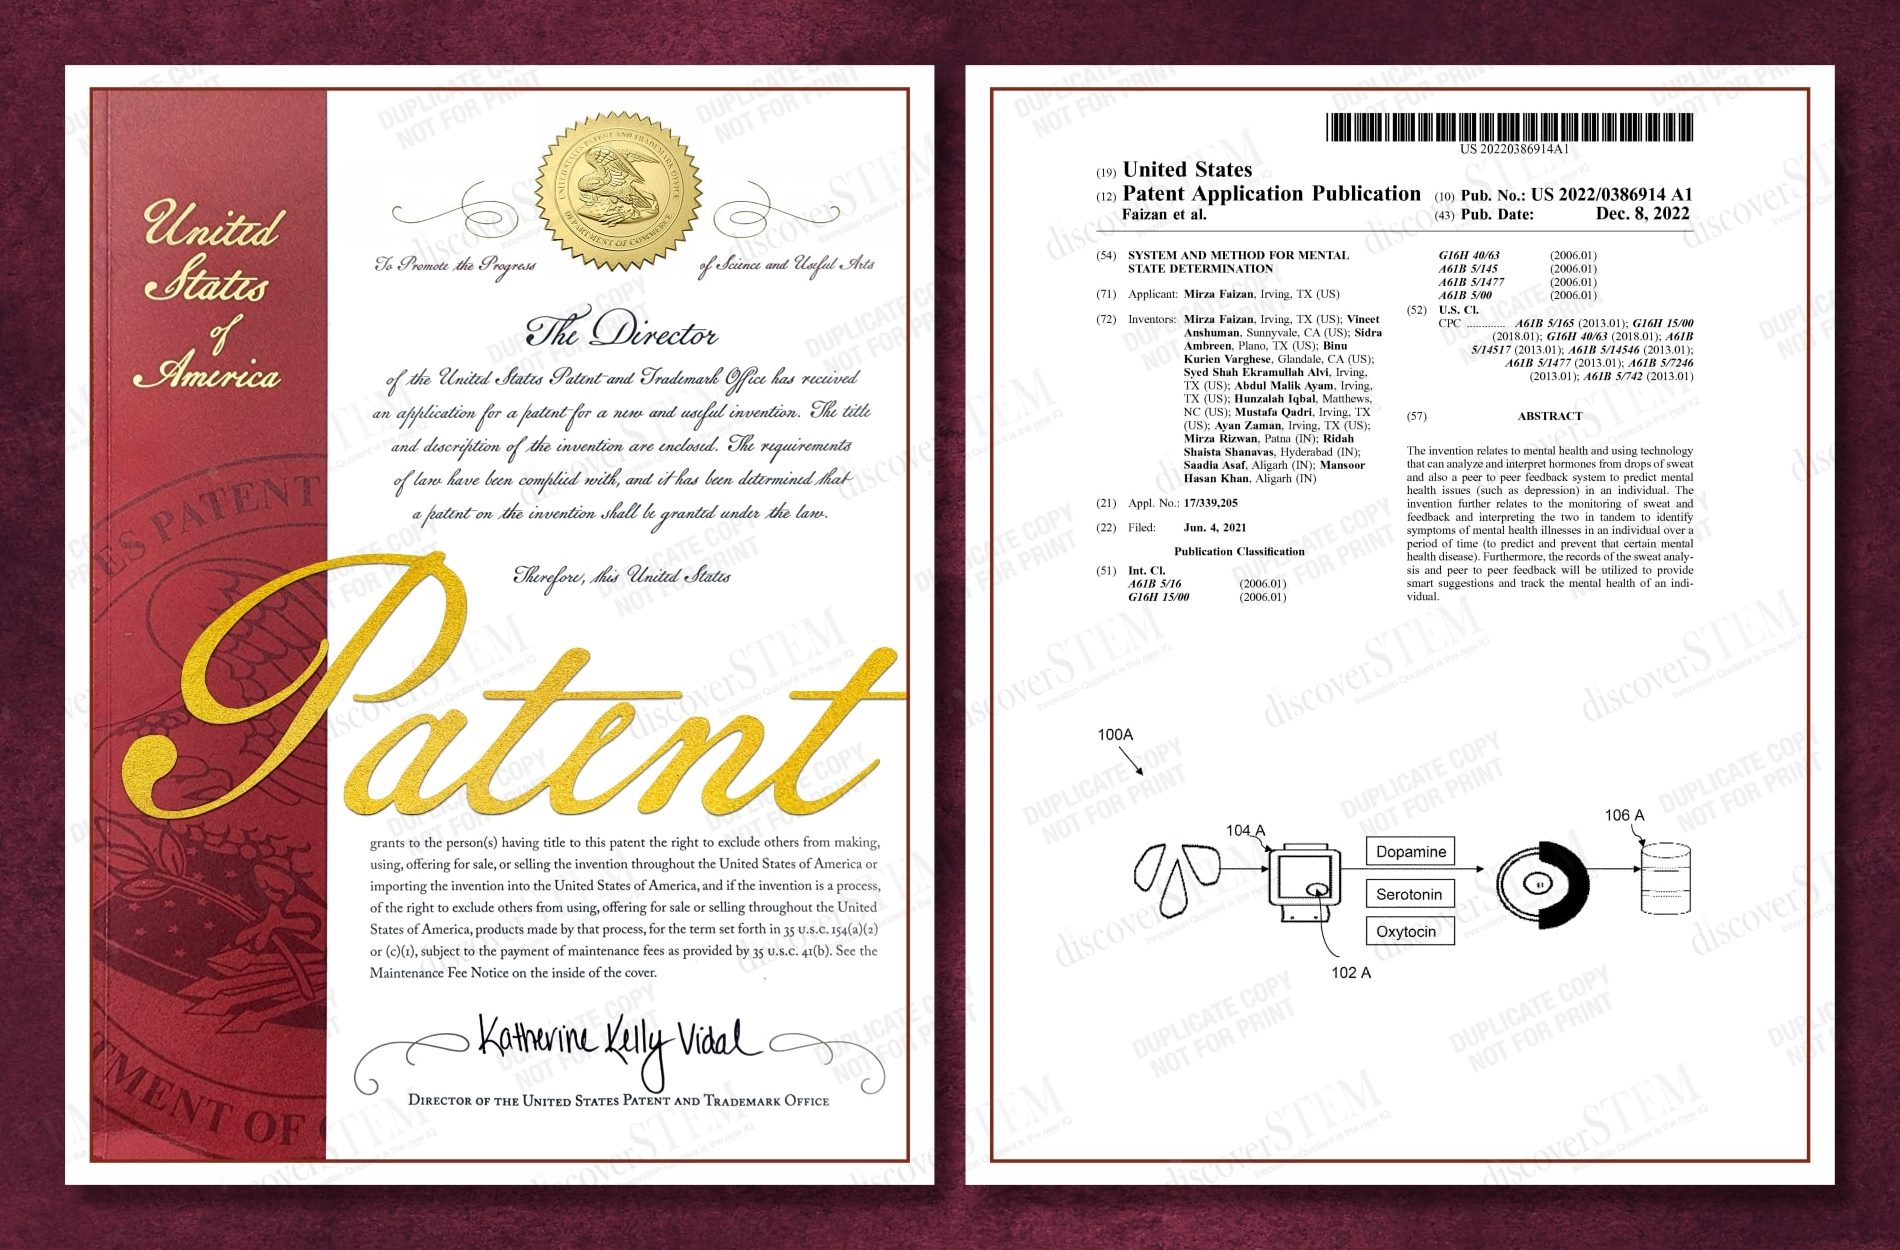 US Patent Certificate: System and Method for Mental State Determination [11751783]